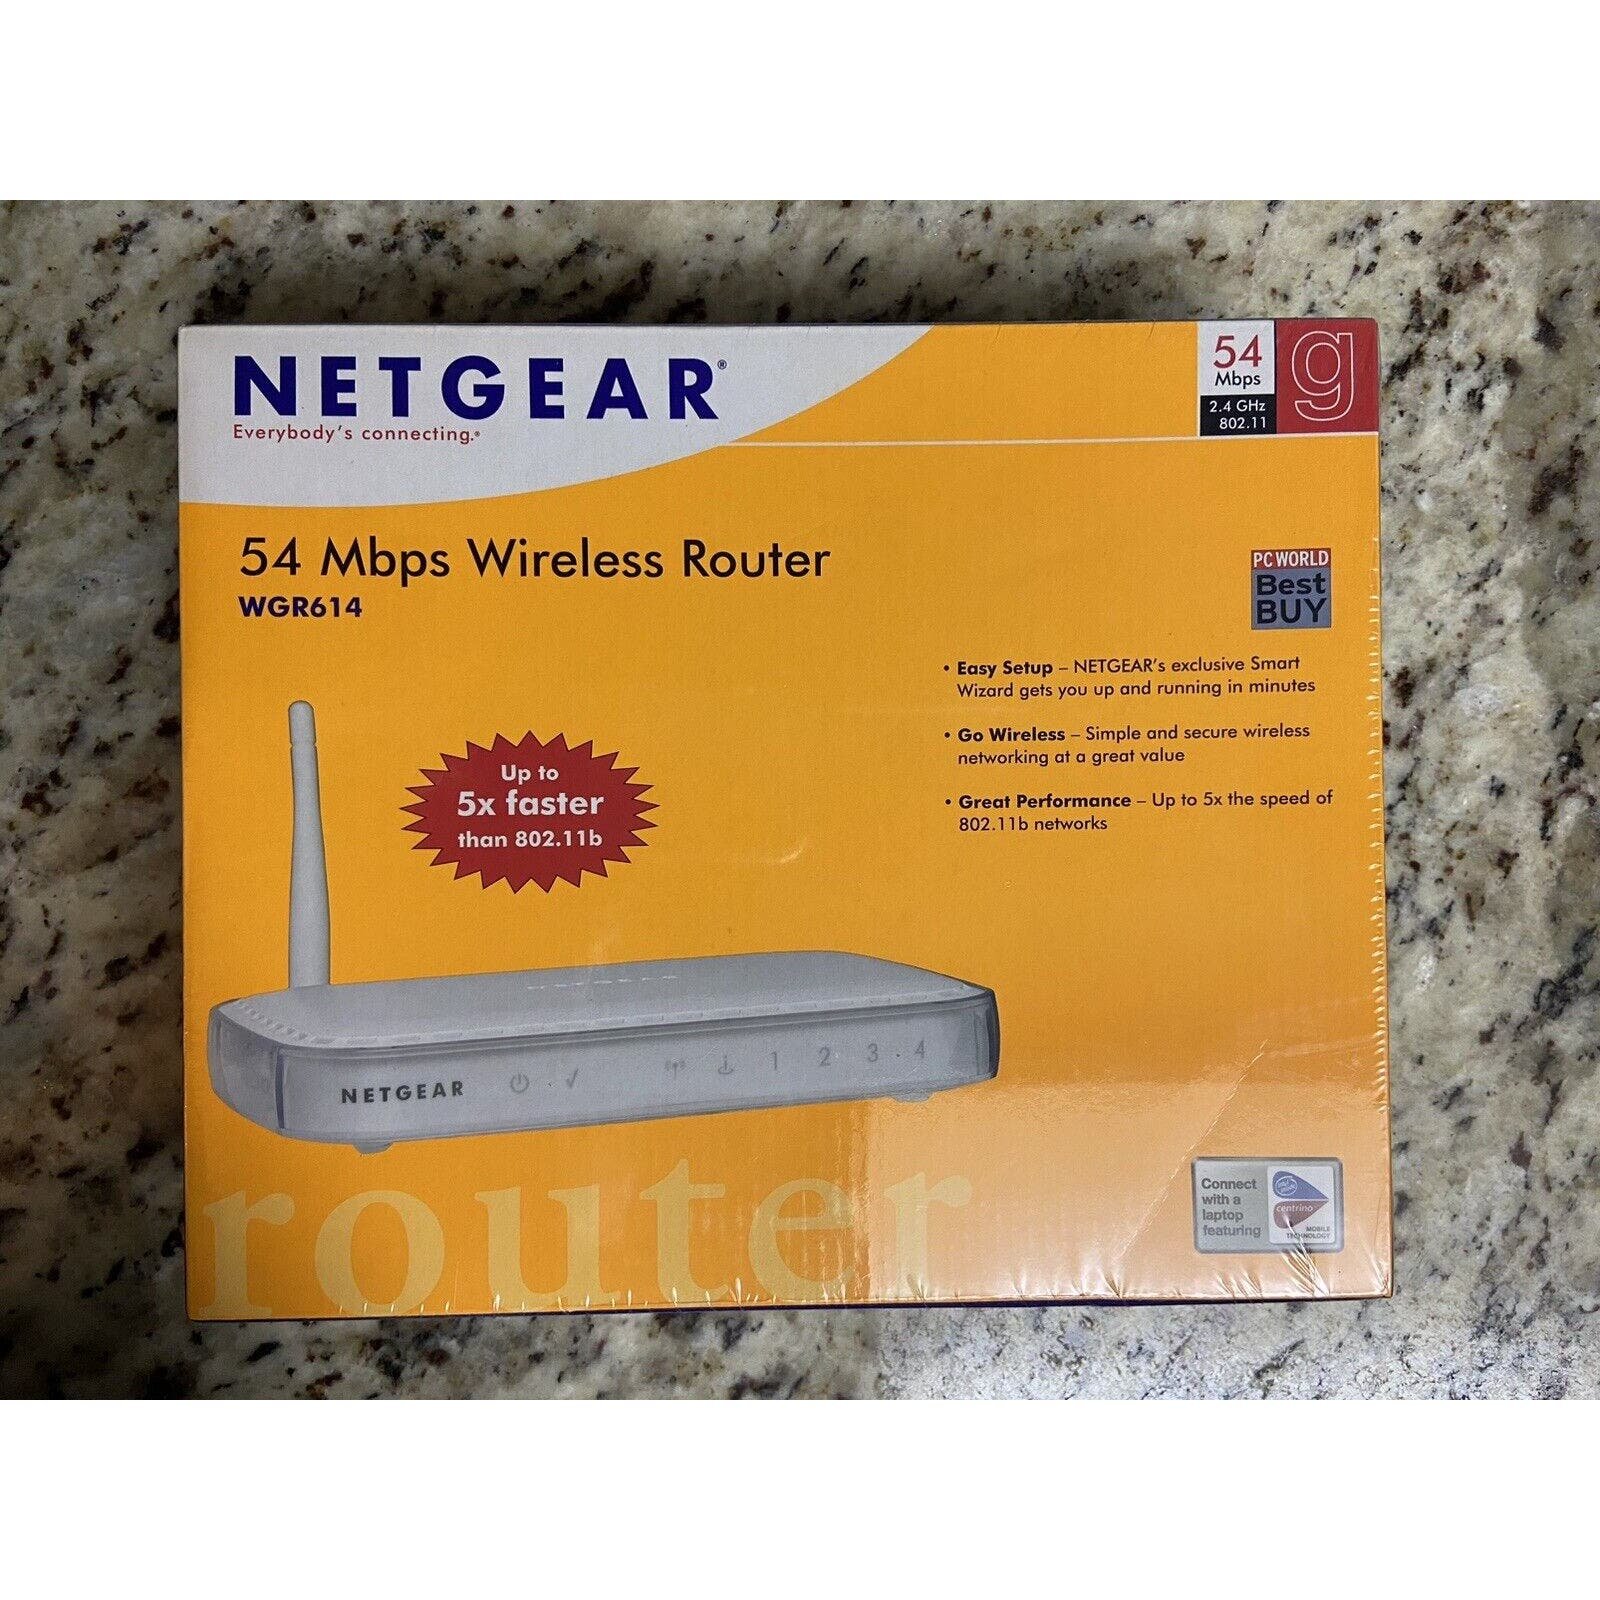 Netgear 54 Mbps Wireless Router 5x Faster WGR614 White Easy Setup Support NEW advPovpPf